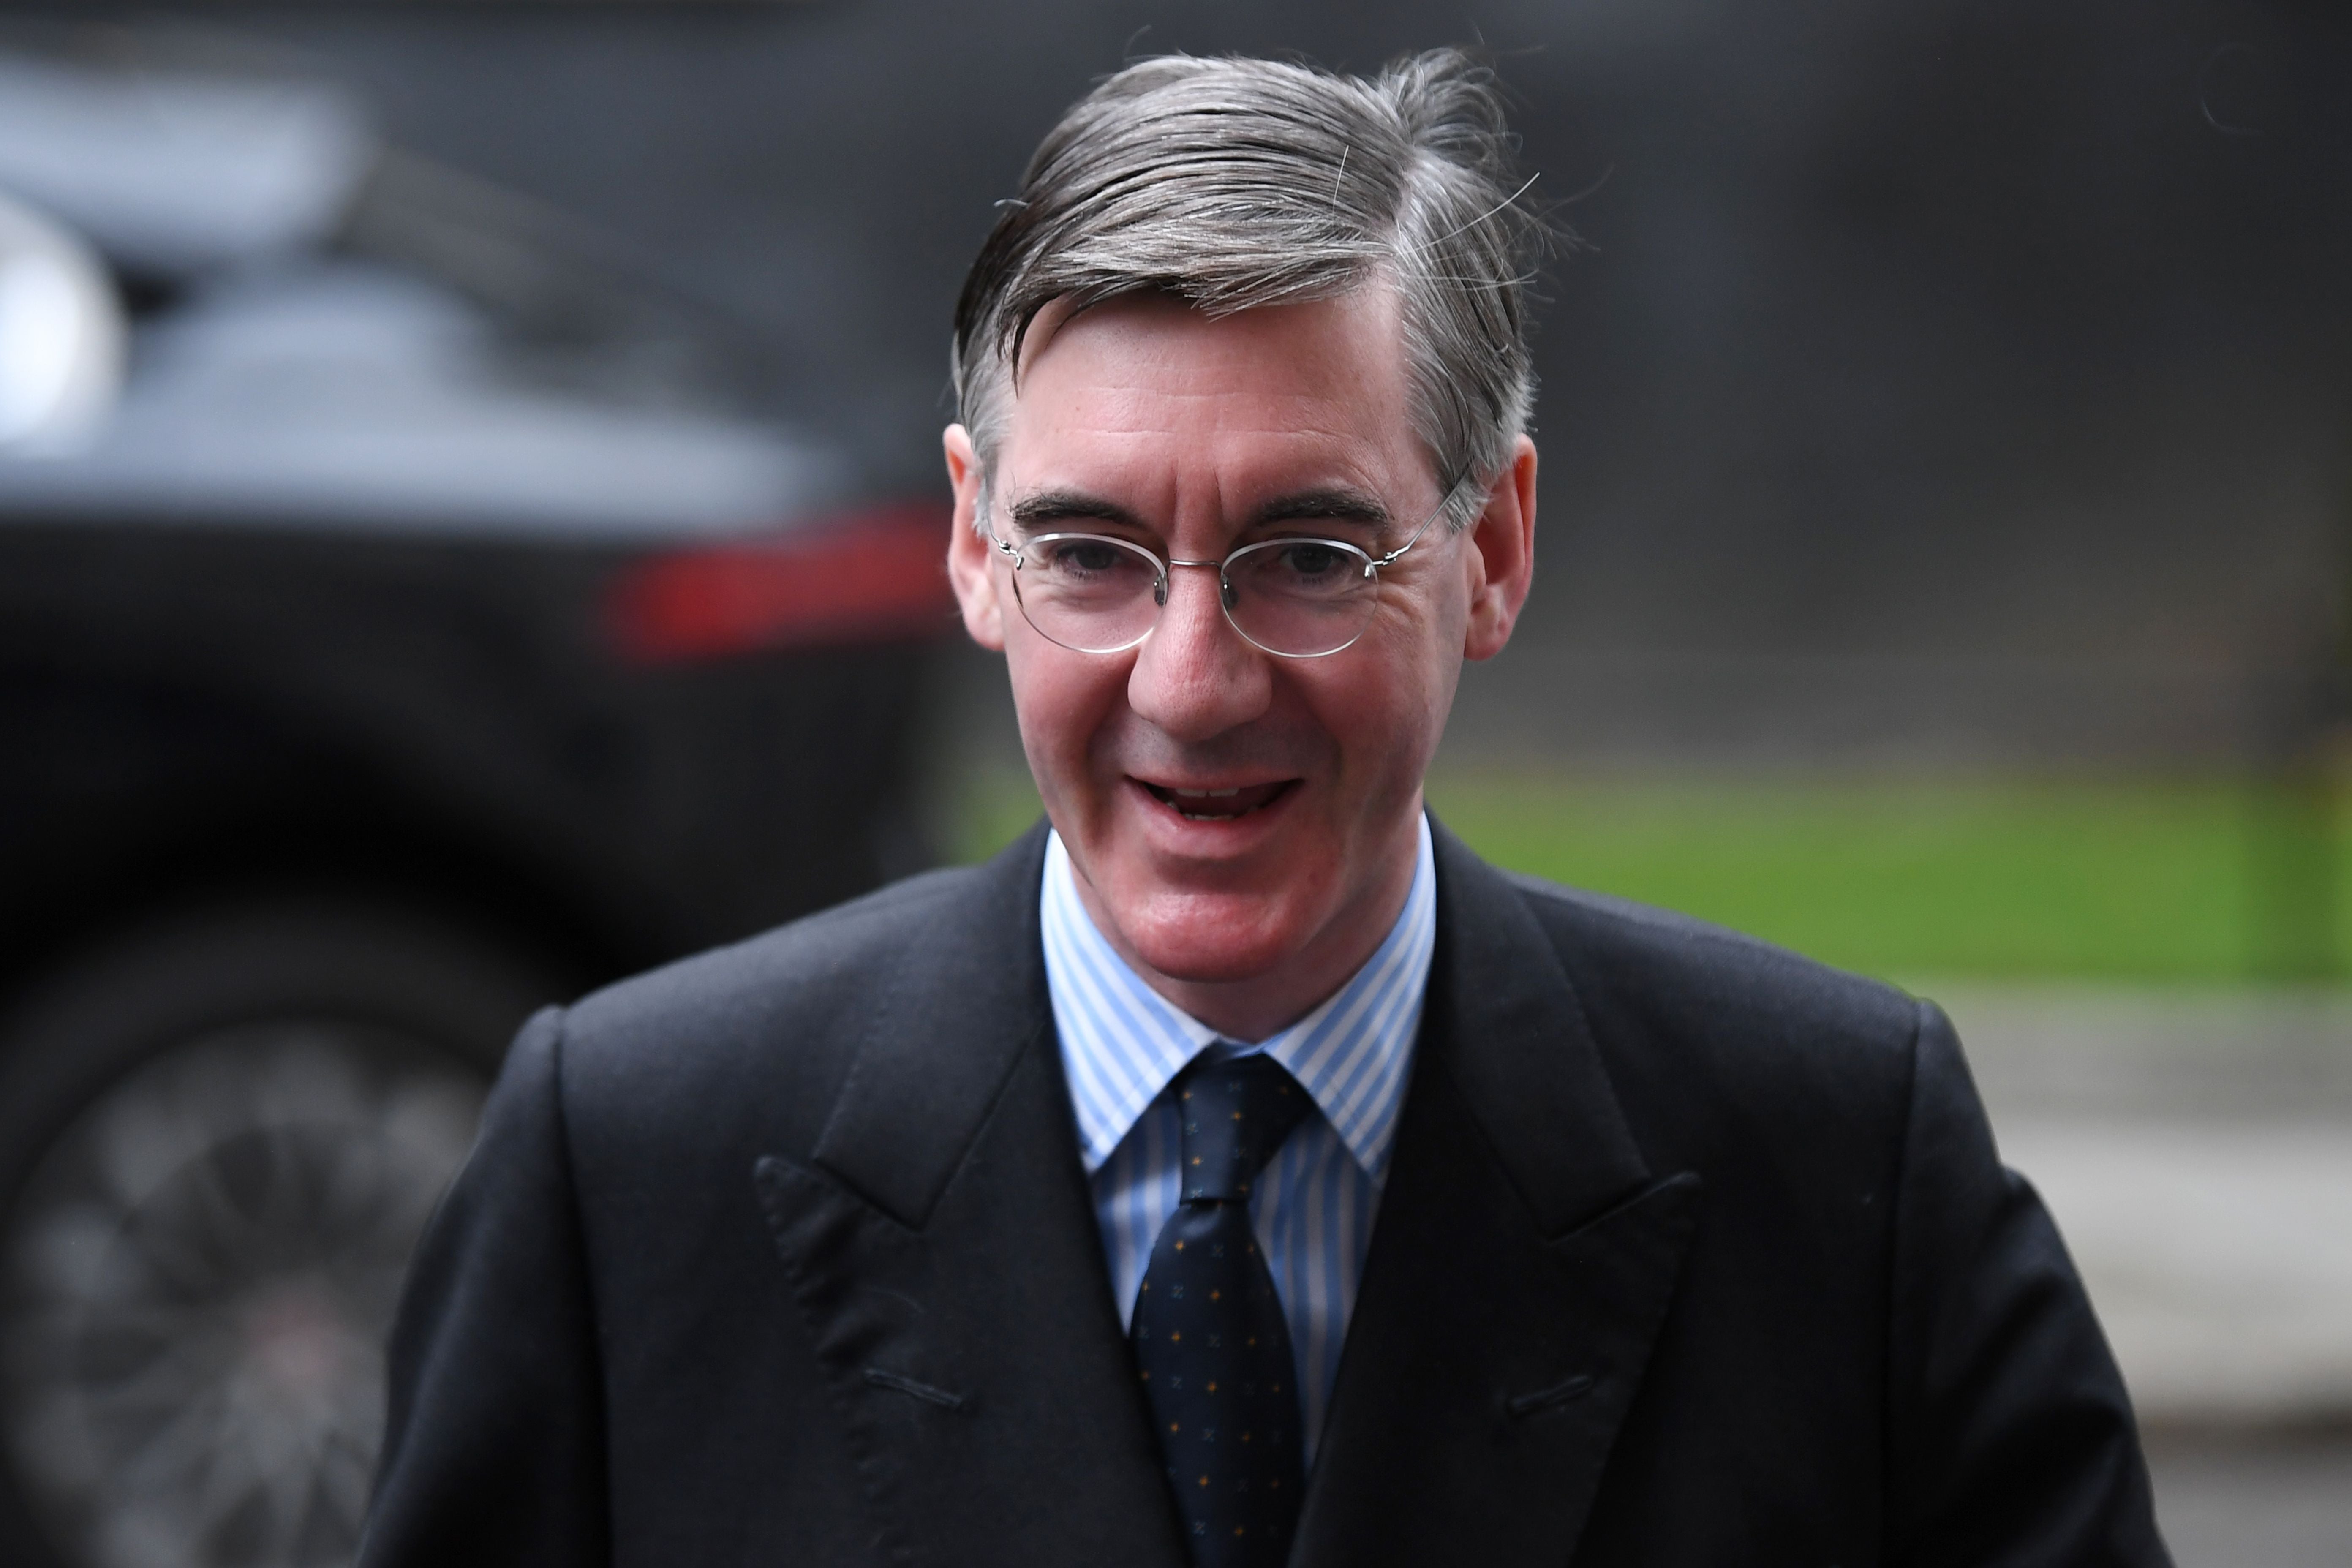 Jacob Rees-Mogg had a Covid test couriered to his home, messages suggest